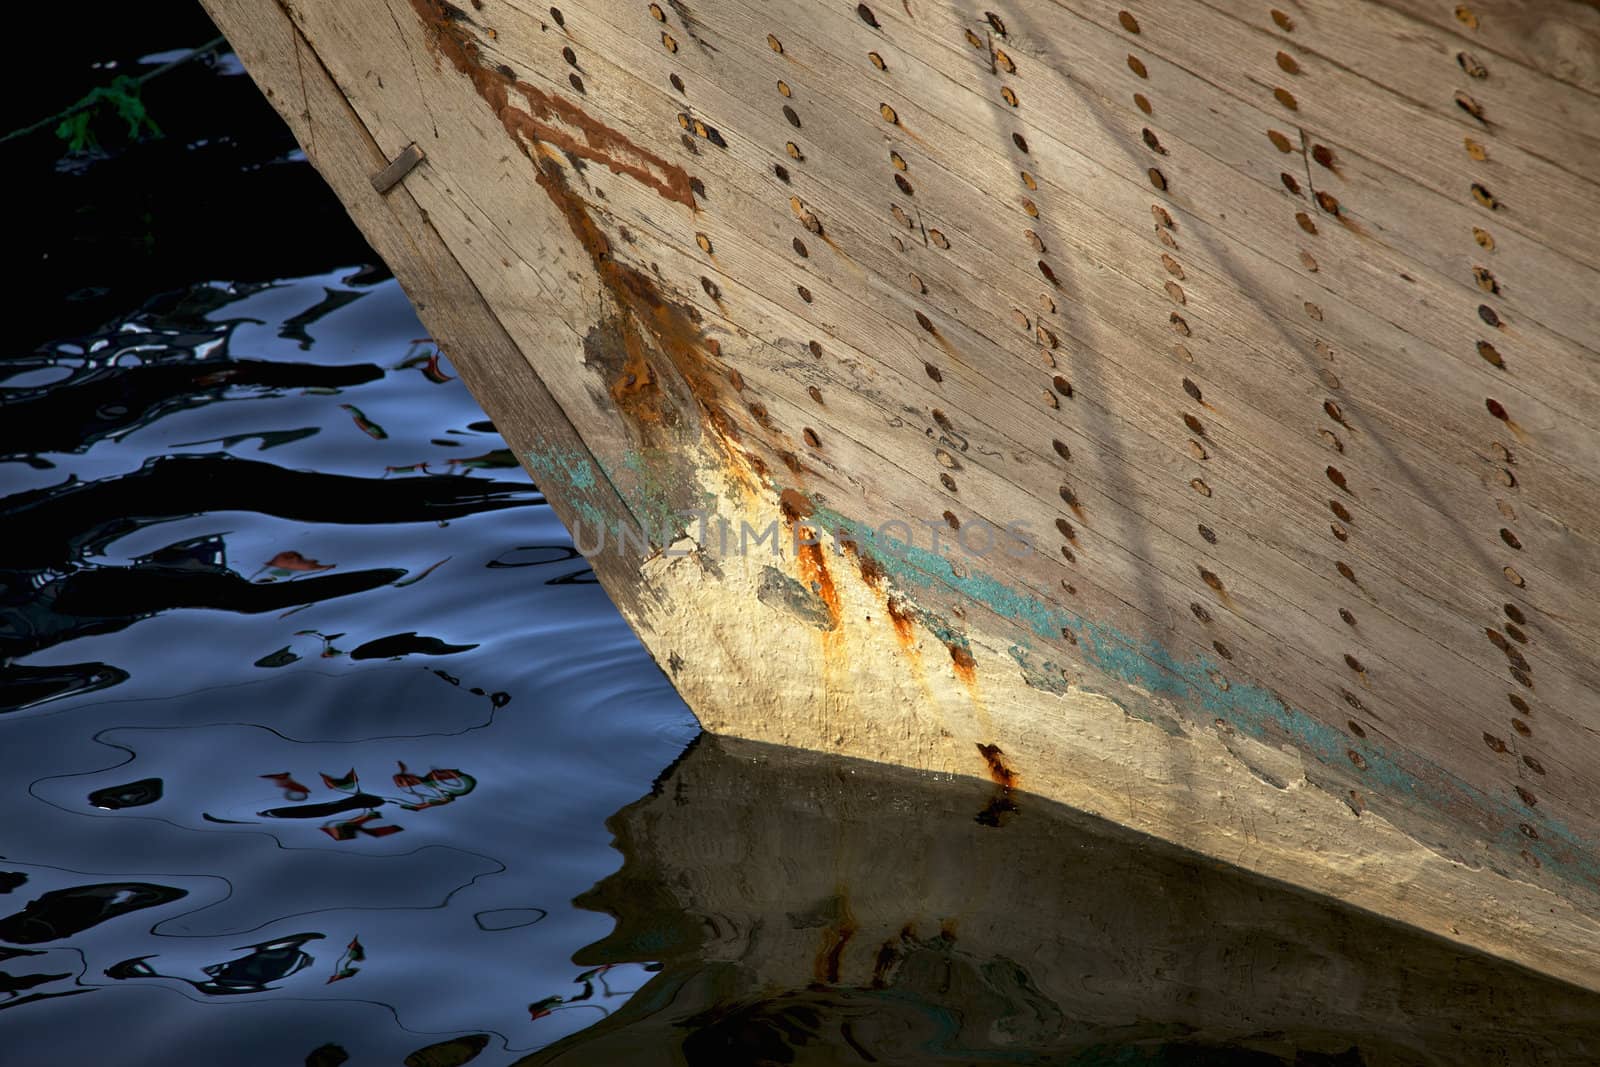 The bow of a traditional wooden trading dhow moored in Dubai Creek, UAE.